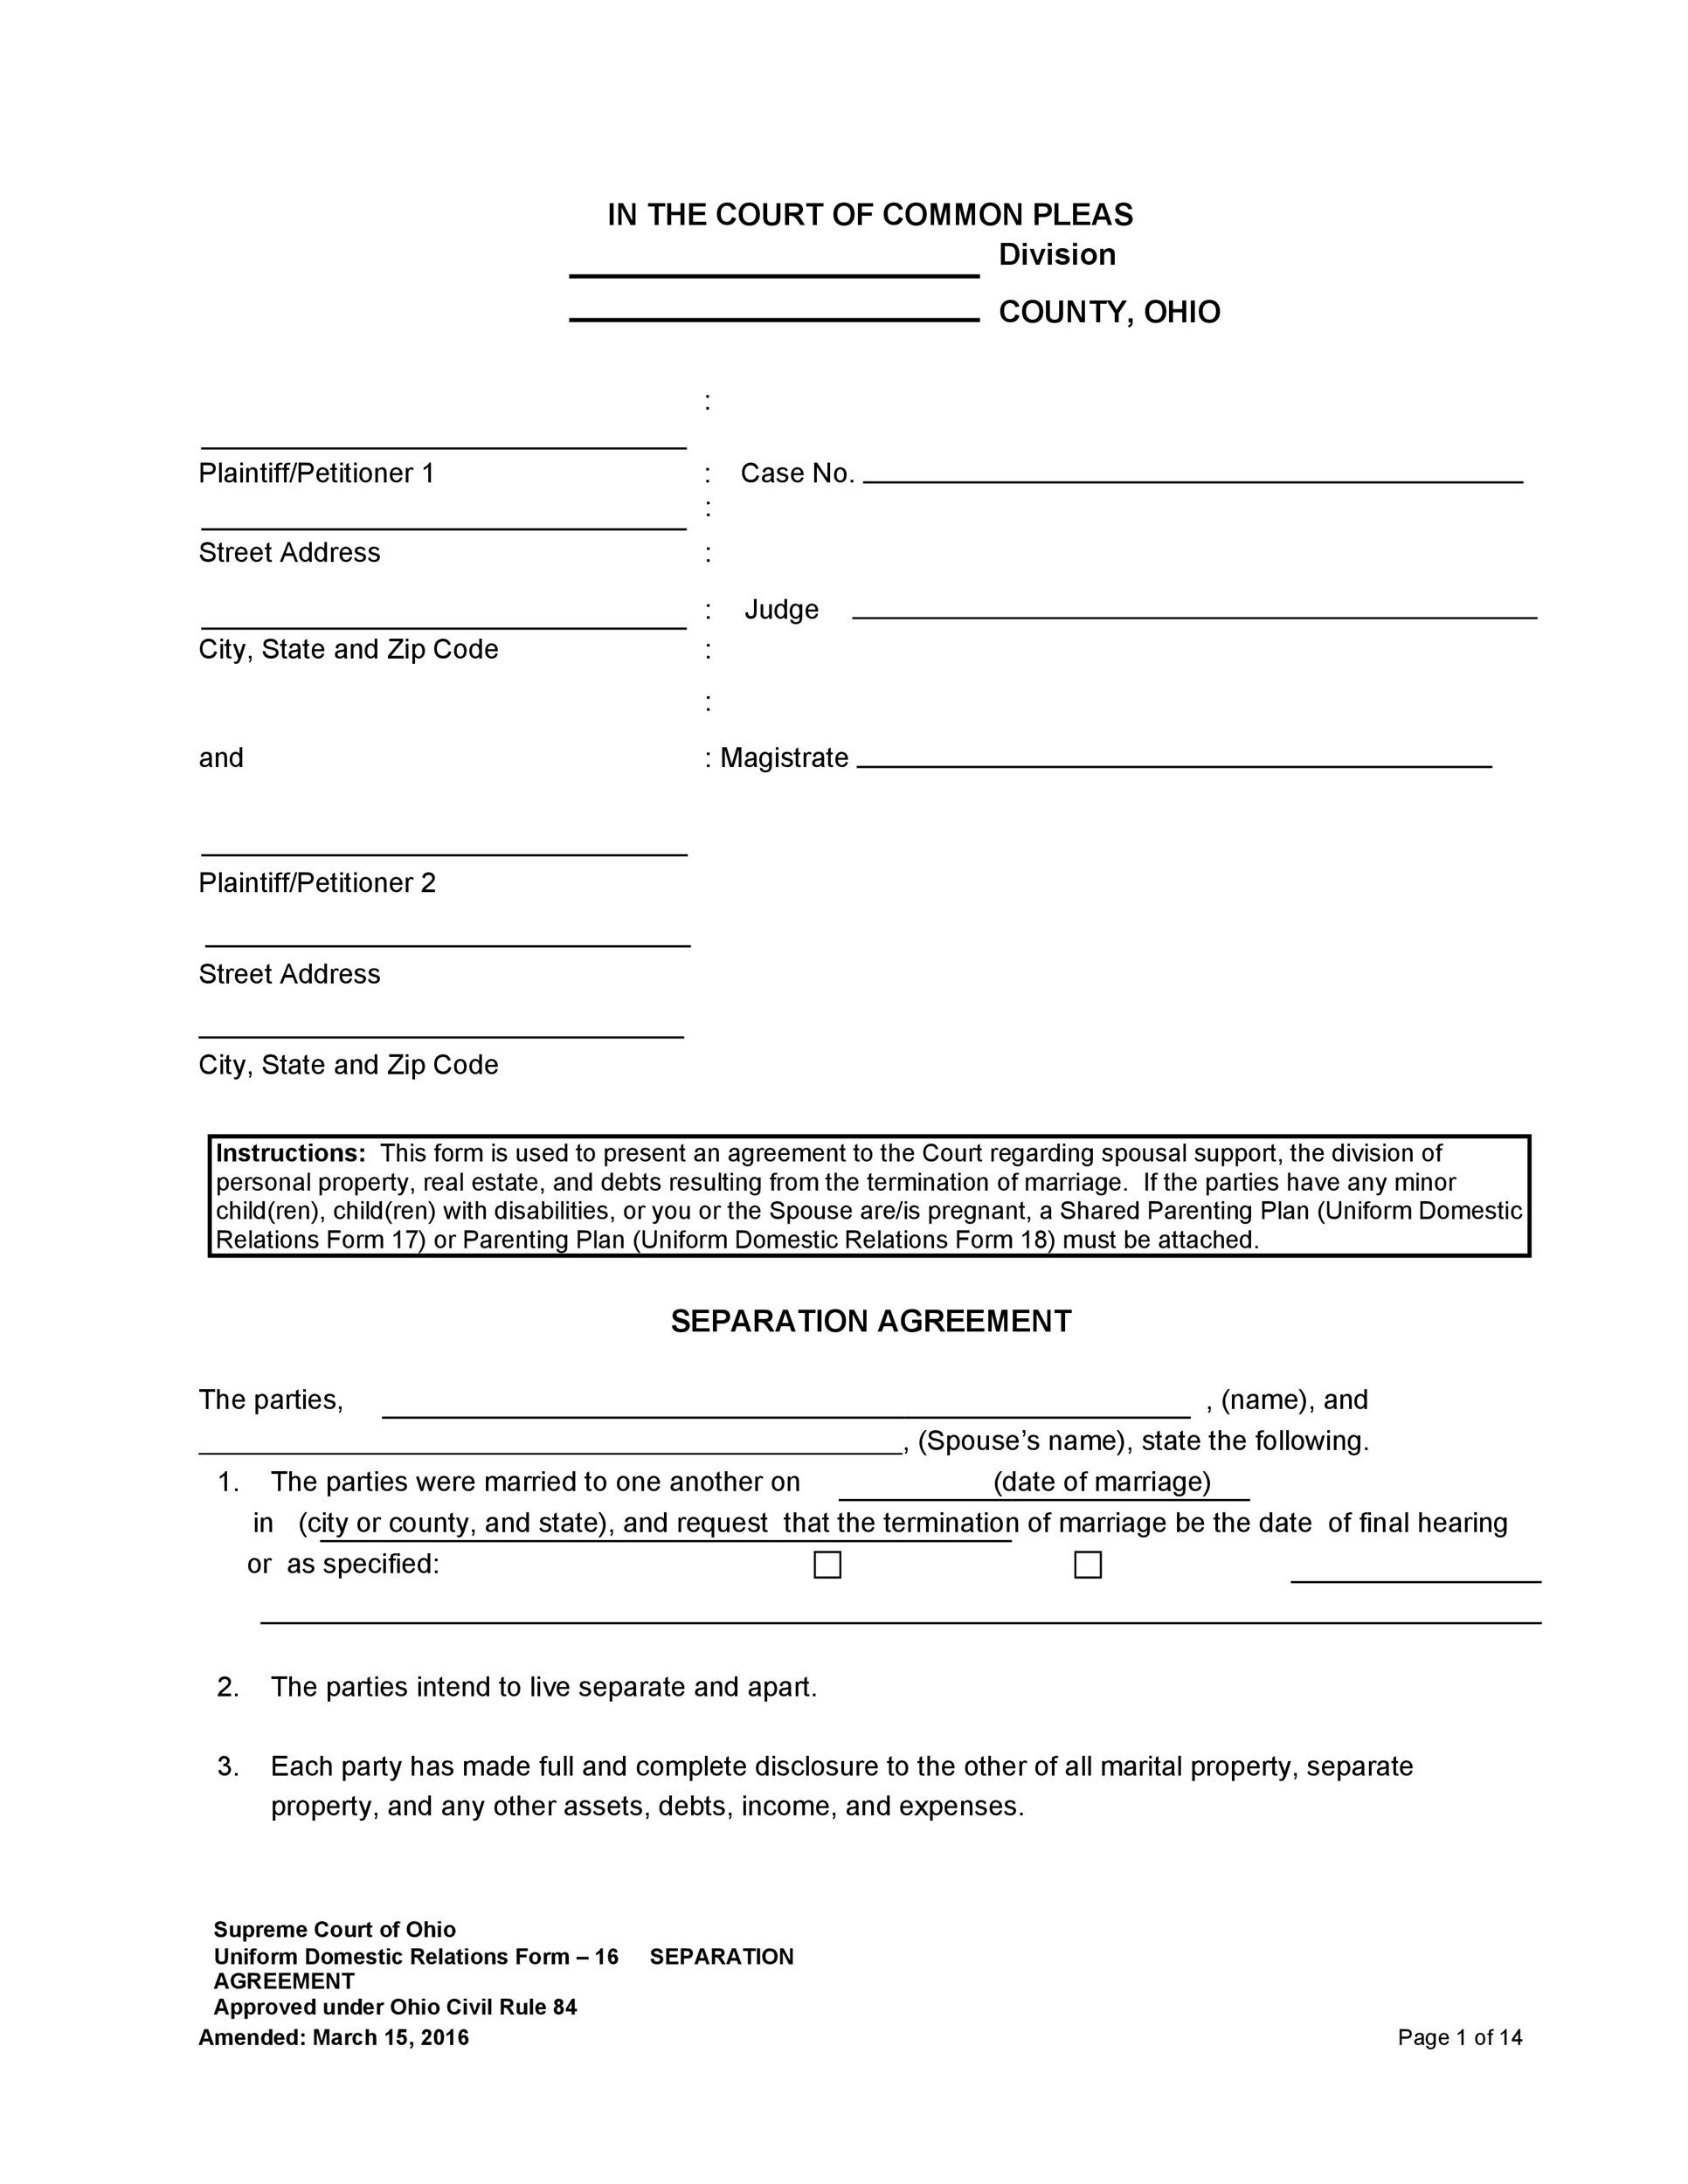 spousal-support-agreement-template-tutore-org-master-of-documents